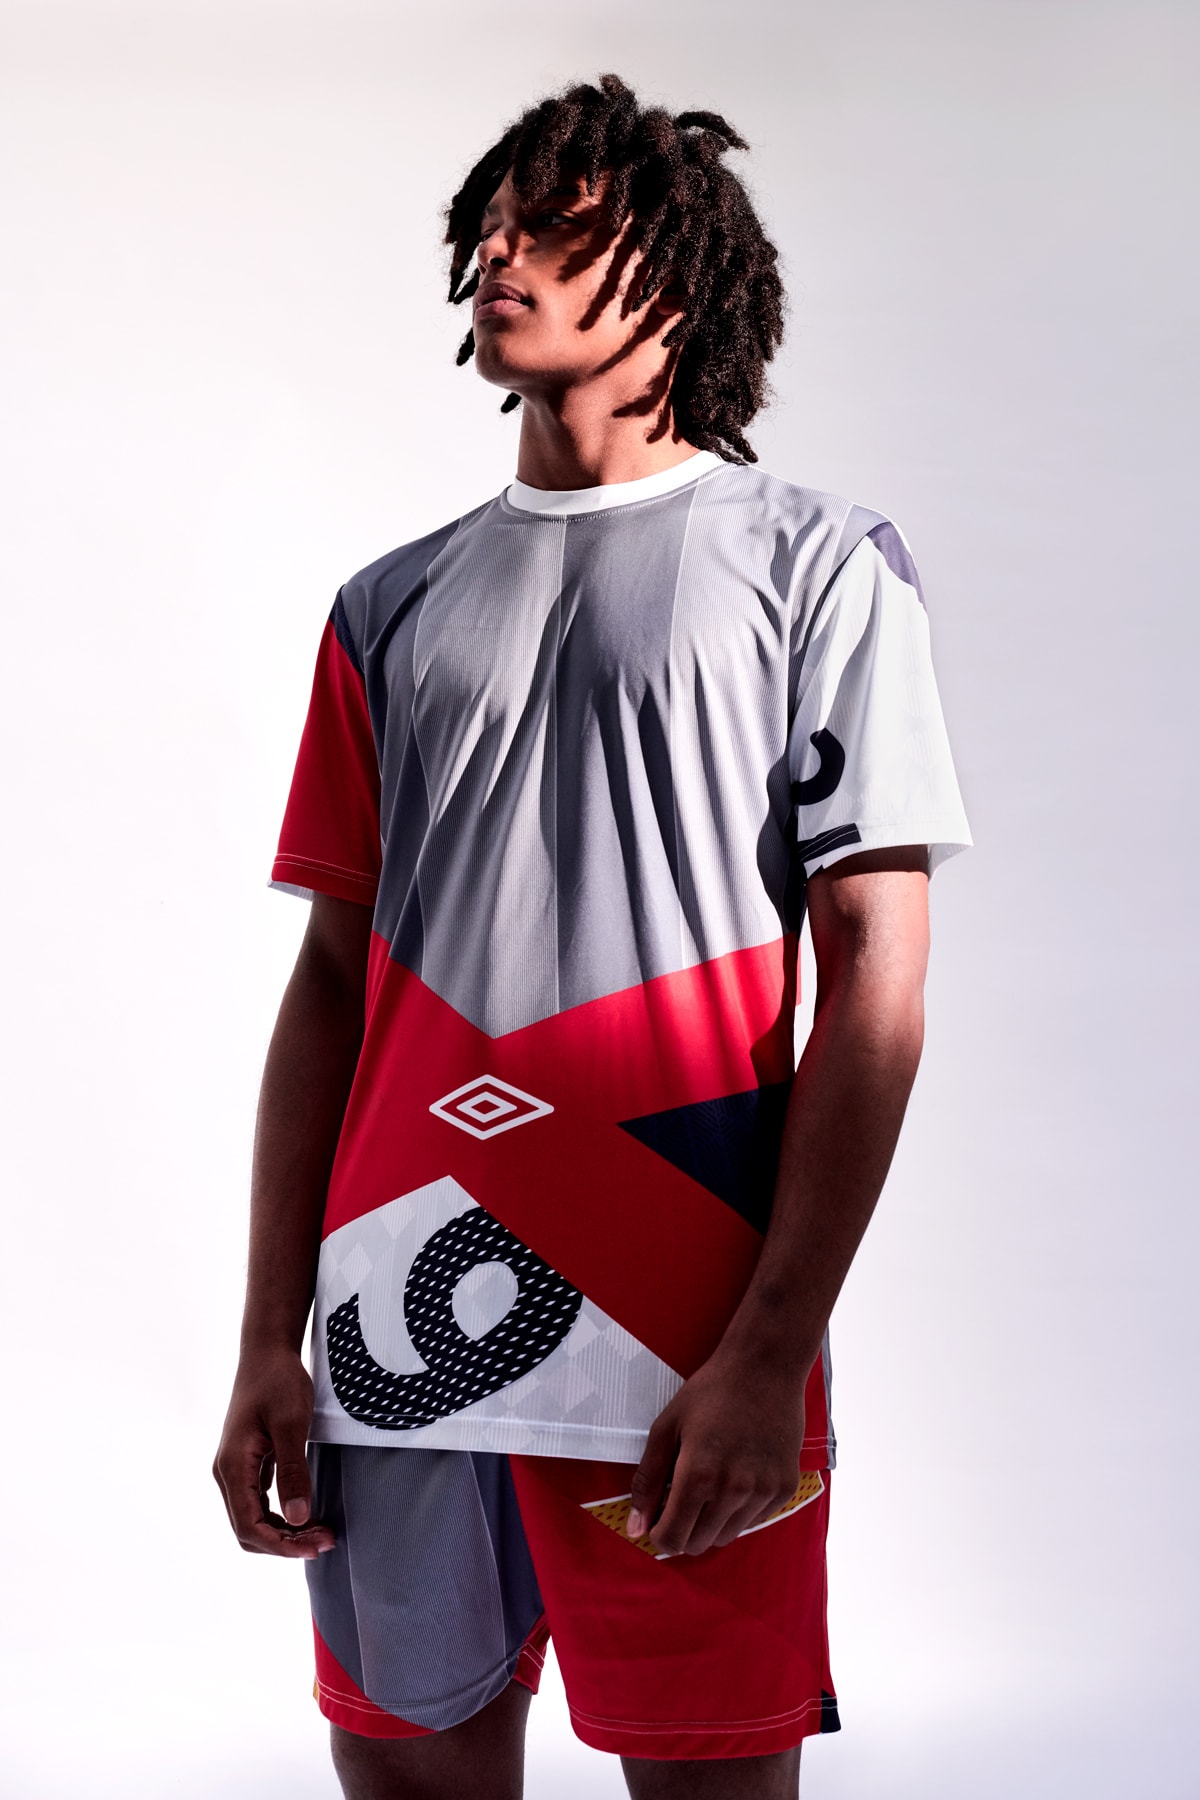 Umbro Christopher Raeburn Spring Summer 2018 Collection Lookbook Collaboration SS18 soccer football uniform jersey remade reduced recycled english deconstruct kit may 31